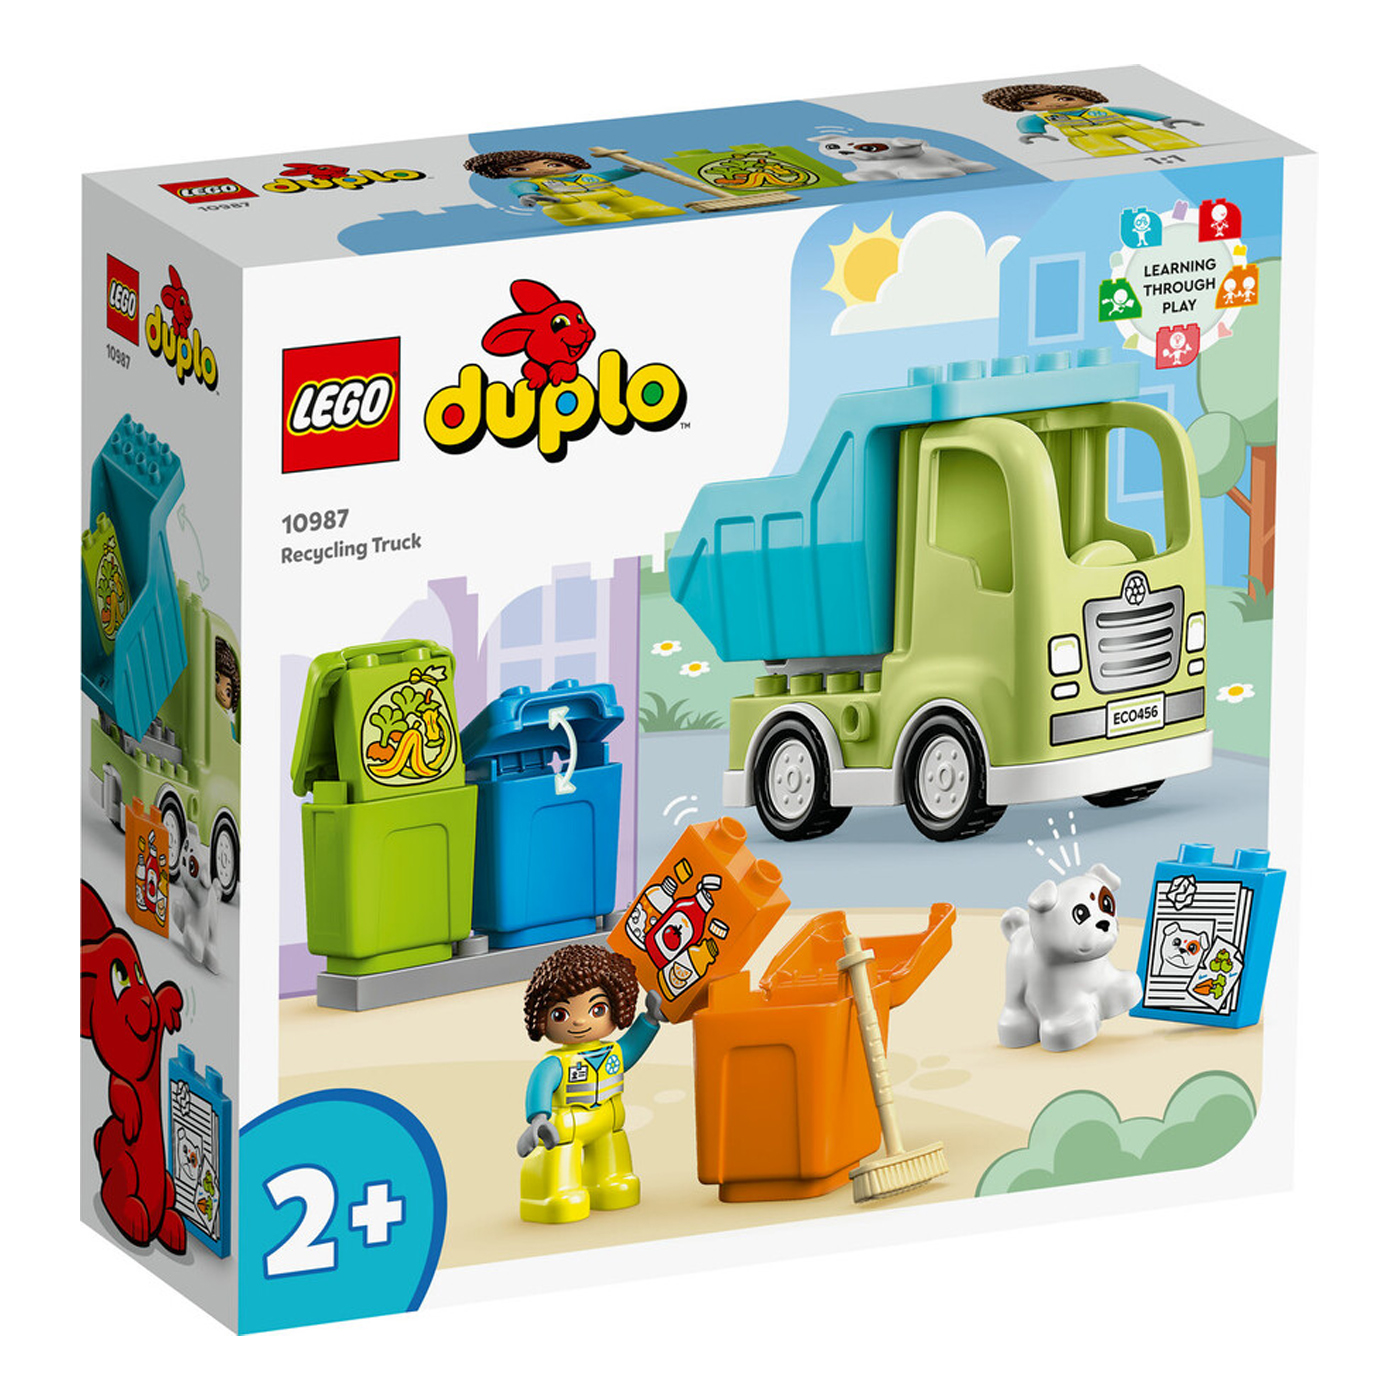  Lego Duplo Recycling Truck